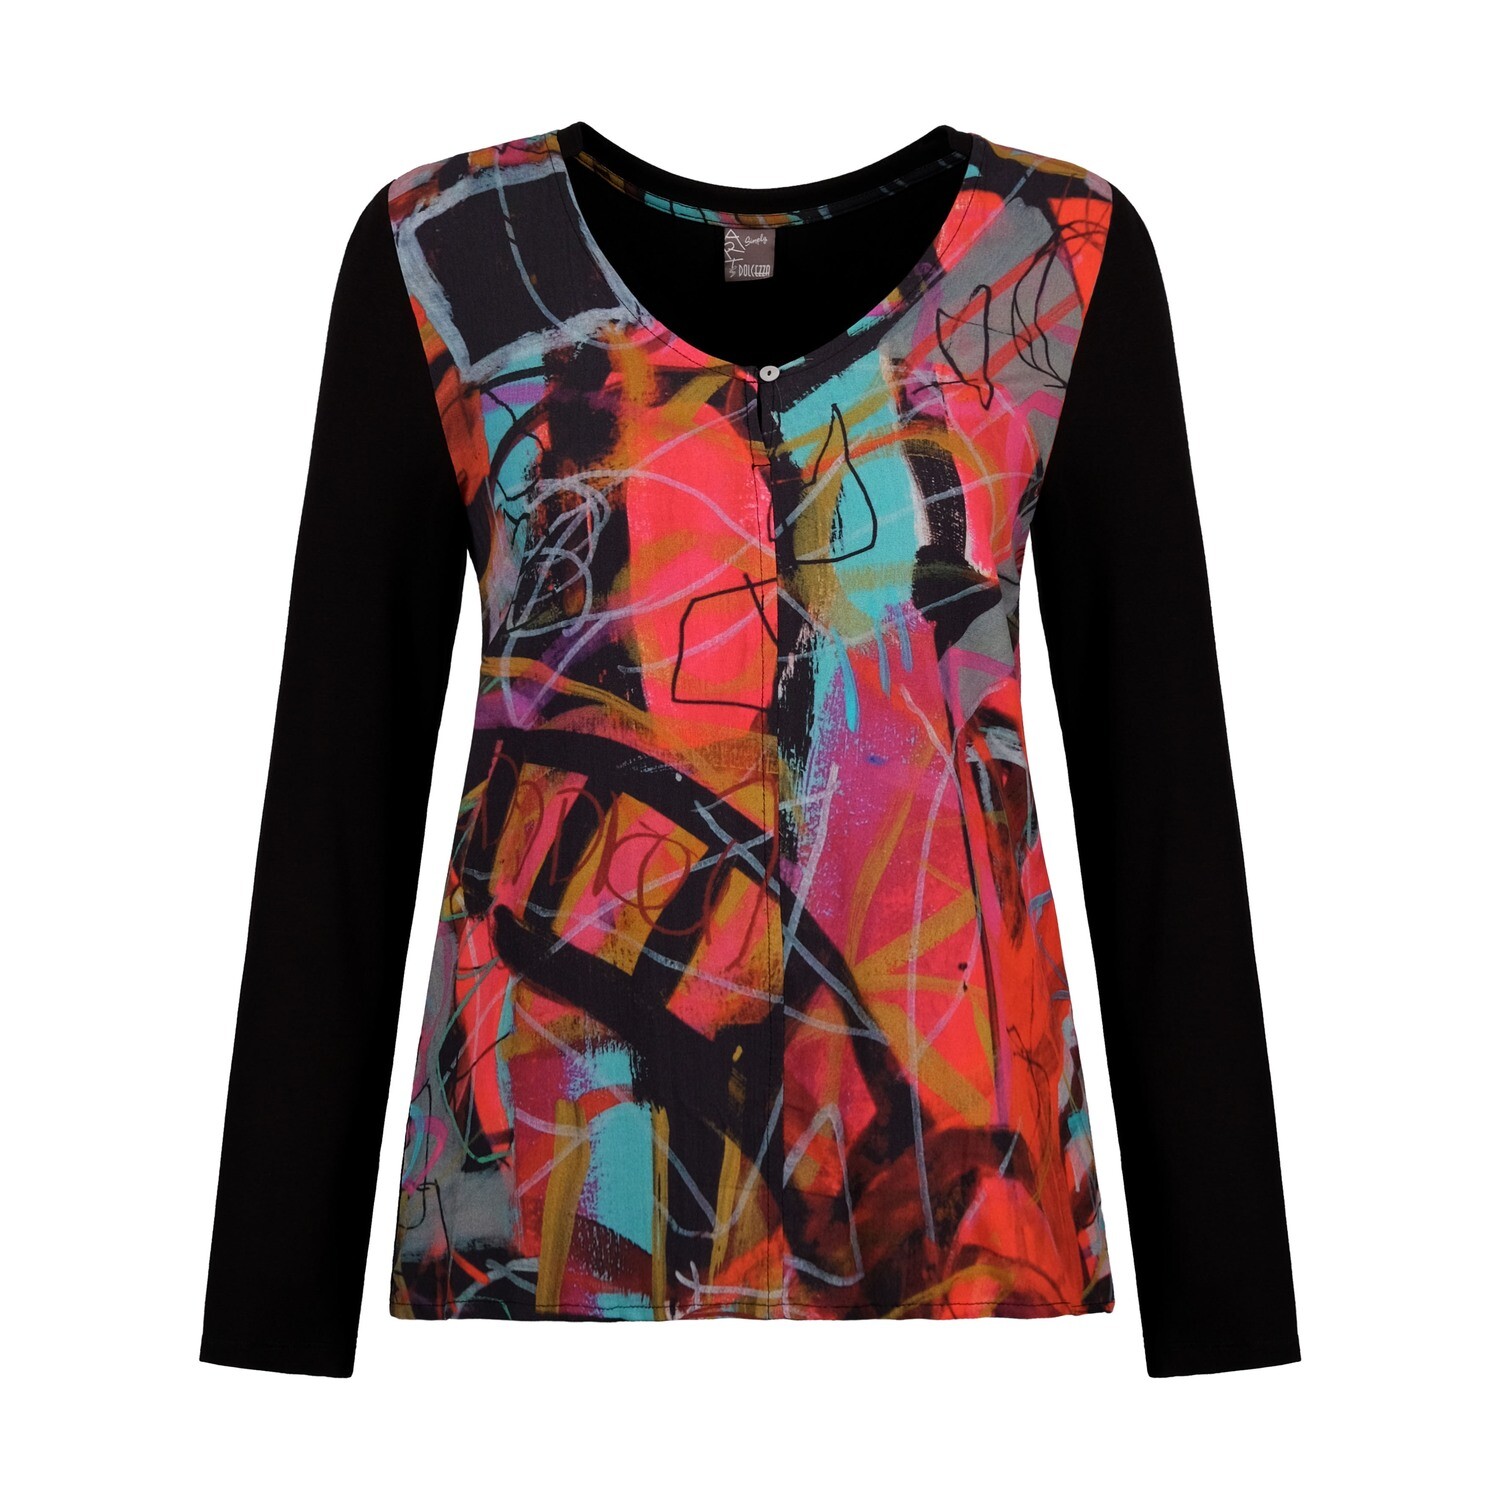 Simply Art Dolcezza: Red 3 Graffiti Abstract Art Keyhole T-Shirt SOLD OUT